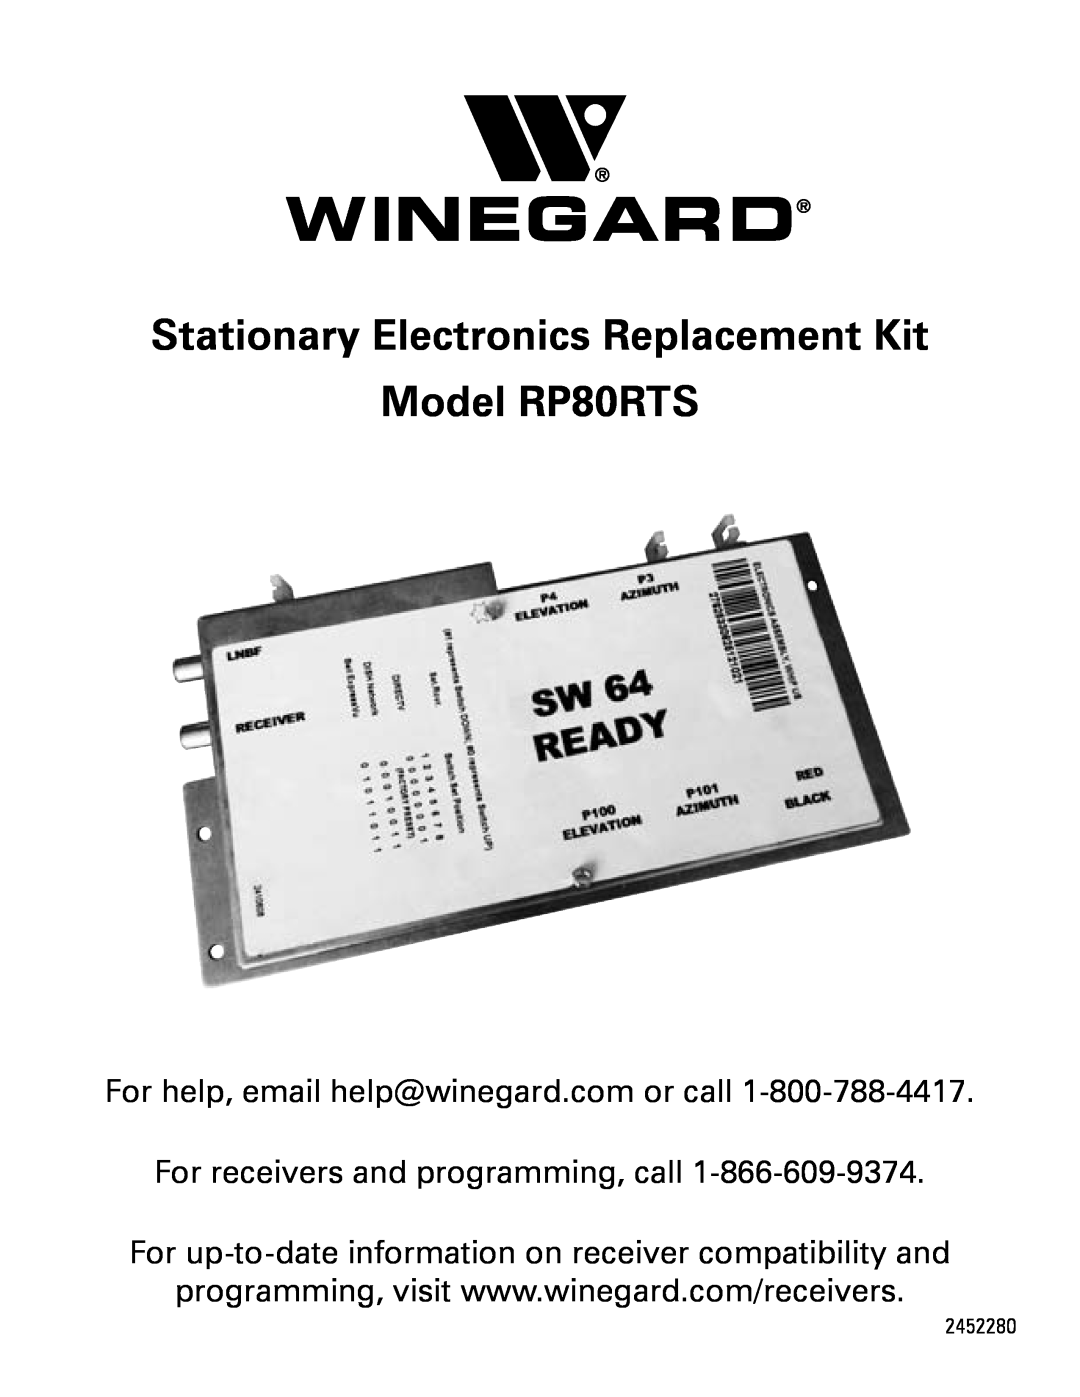 Winegard manual Stationary Electronics Replacement Kit Model RP80RTS, For help, email help@winegard.com or call 